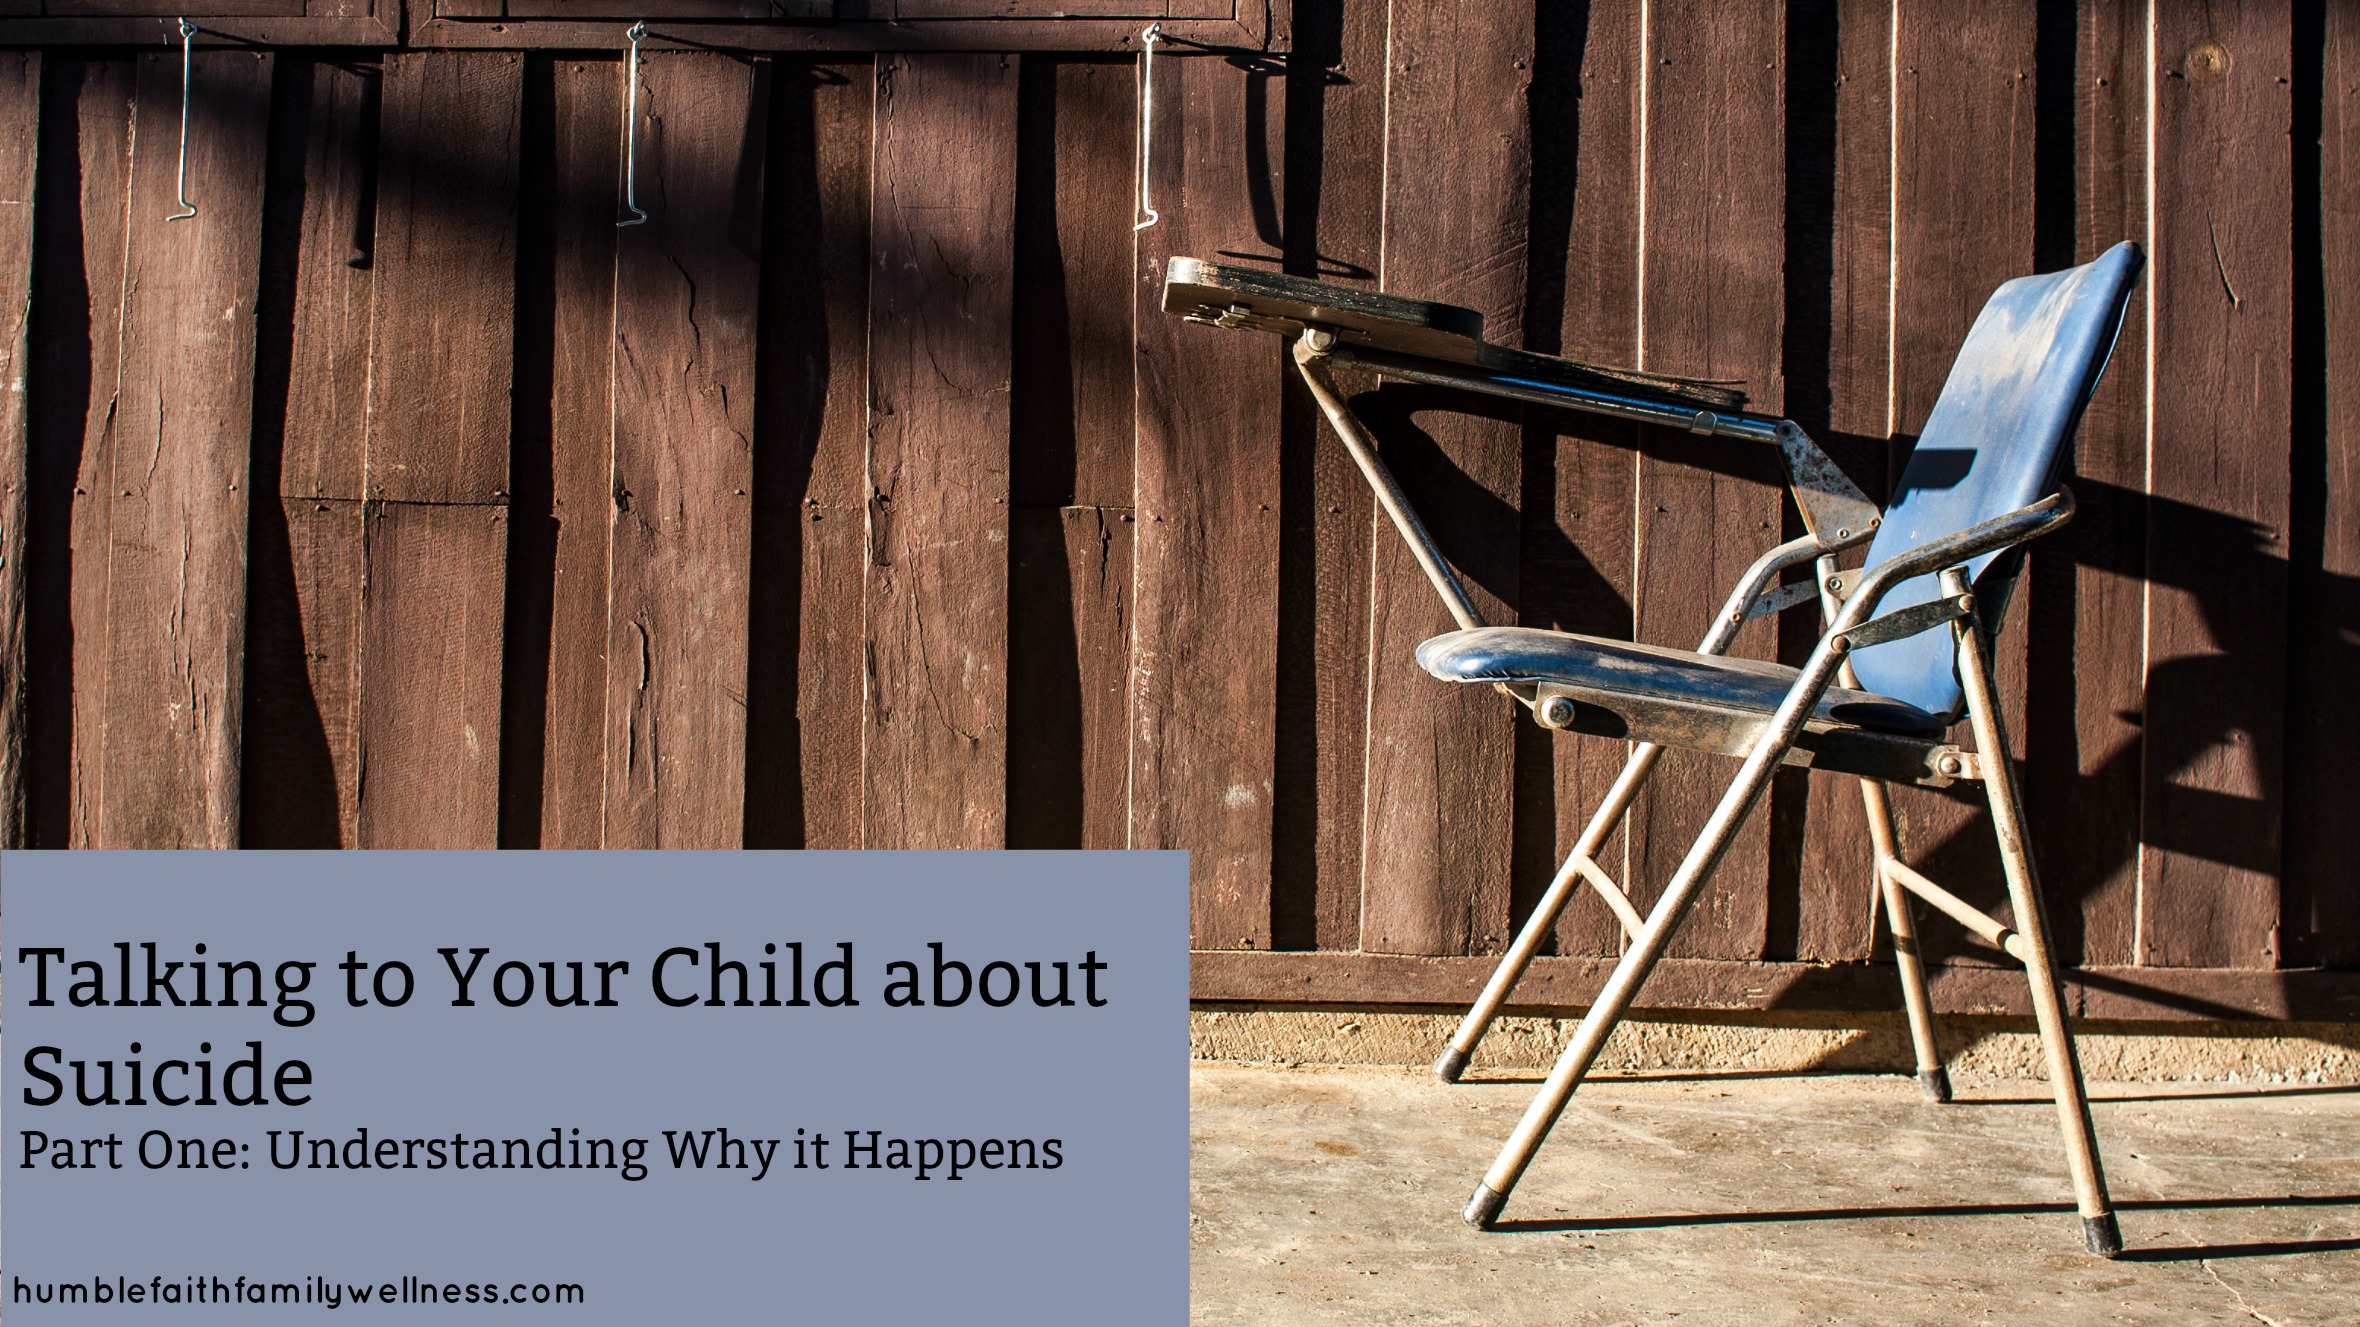 Featured Talking to Your Child About Suicide - Part One: Understanding Why it Happens